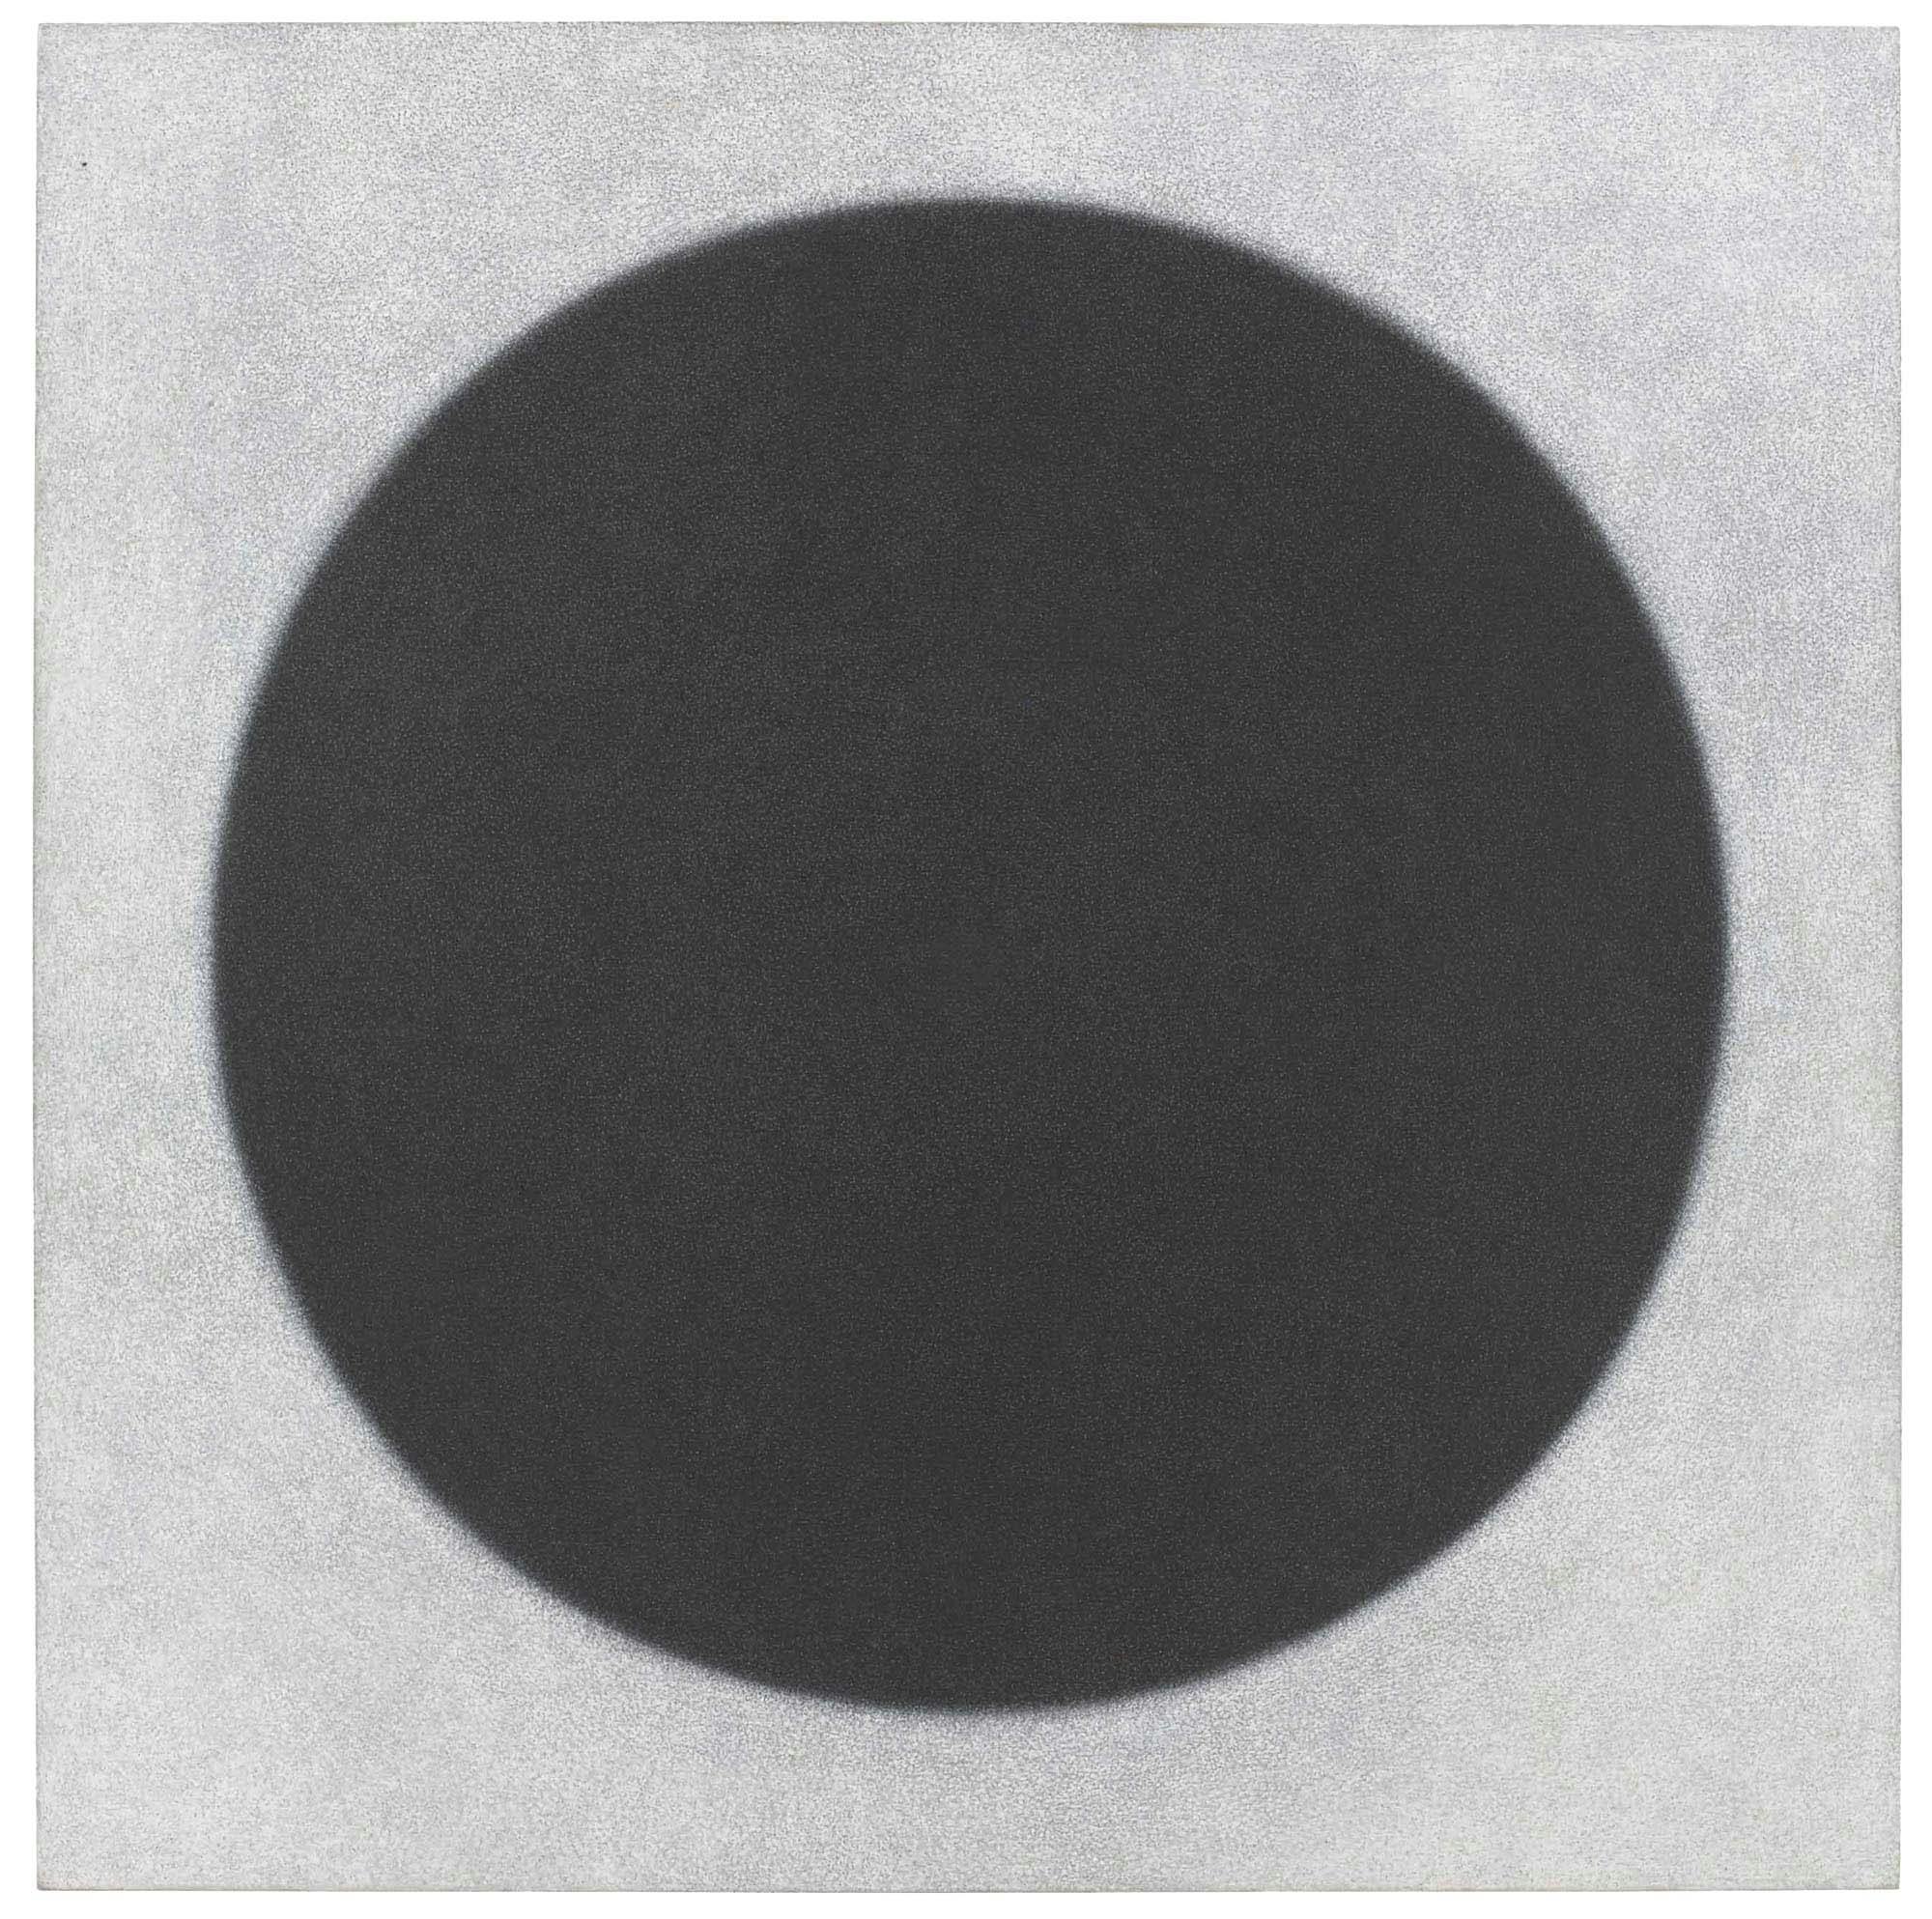 Presence, Circle of Night
1975–76
Oil on linen
90 x 90 in. (228.6 x 228.6 cm)
 – The Richard Pousette-Dart Foundation